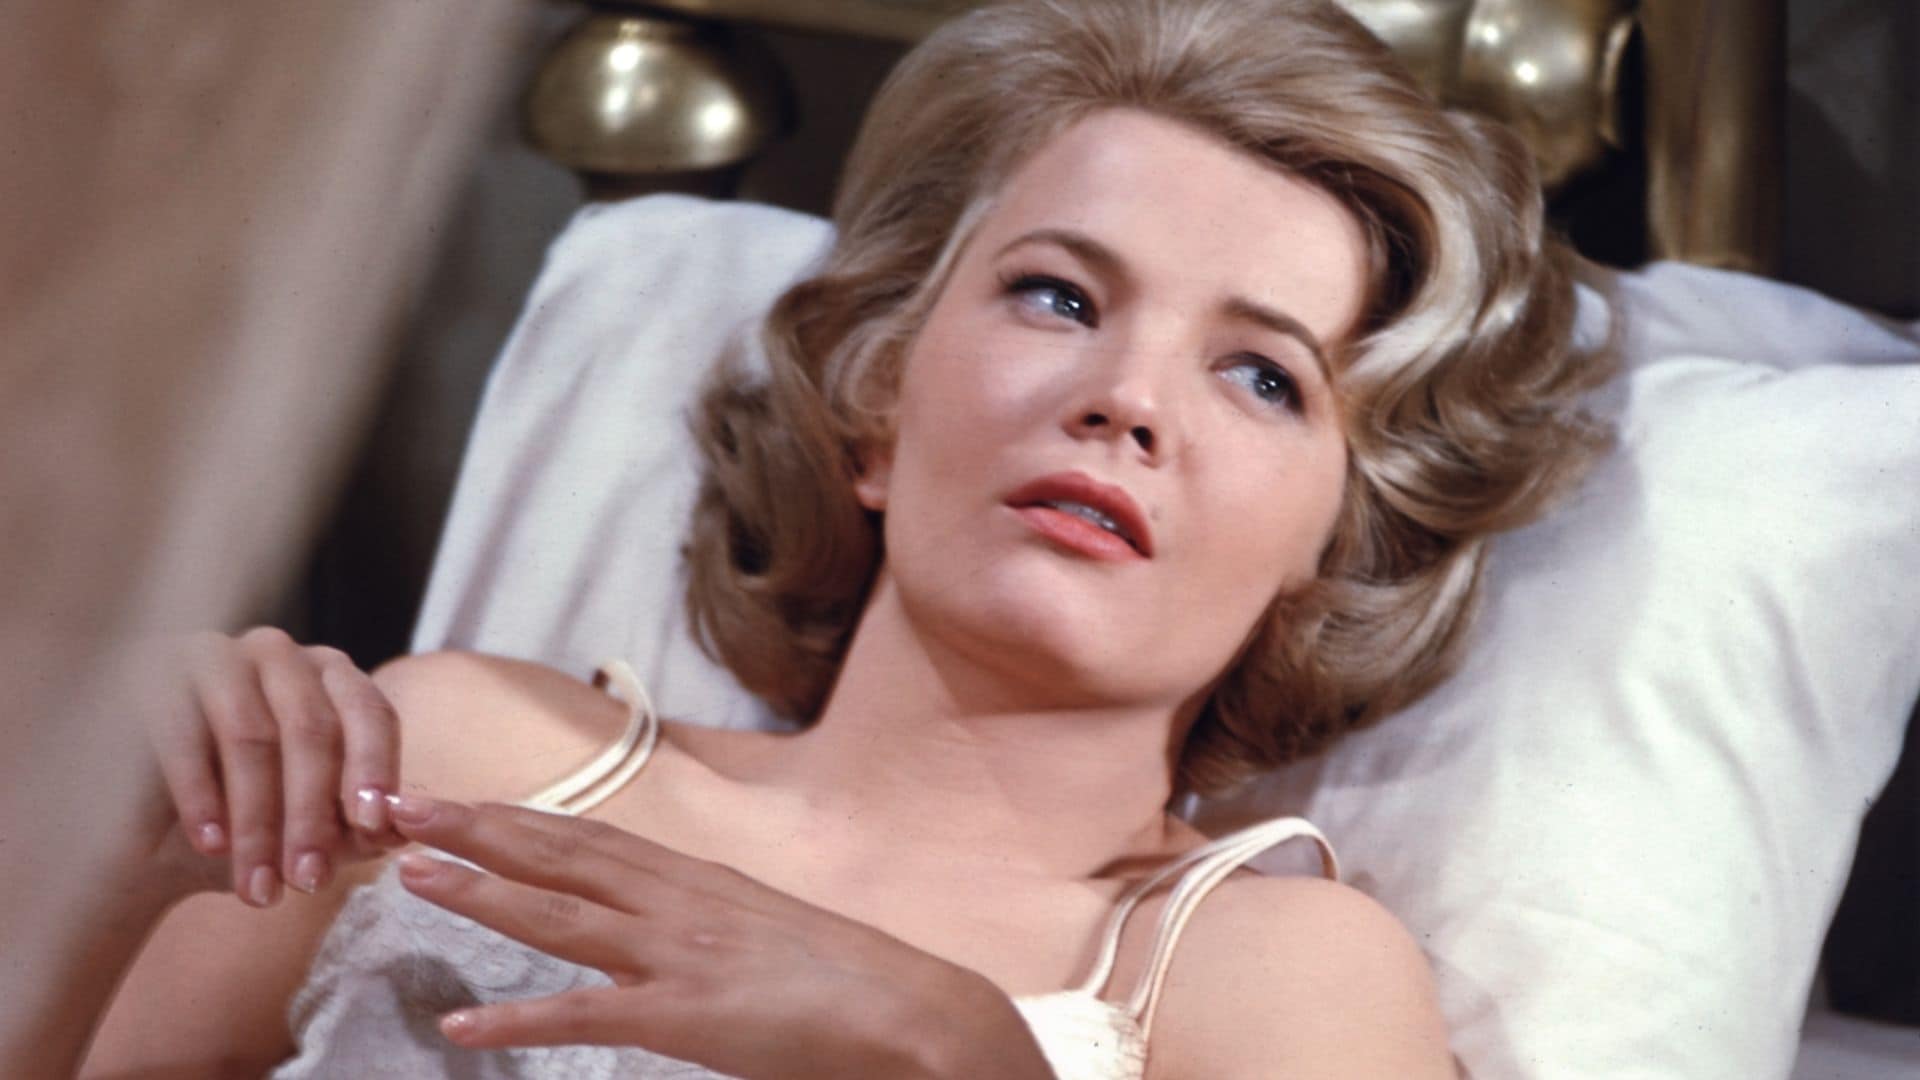 'The Notebook' star Gena Rowlands has been diagnosed with Alzheimer's